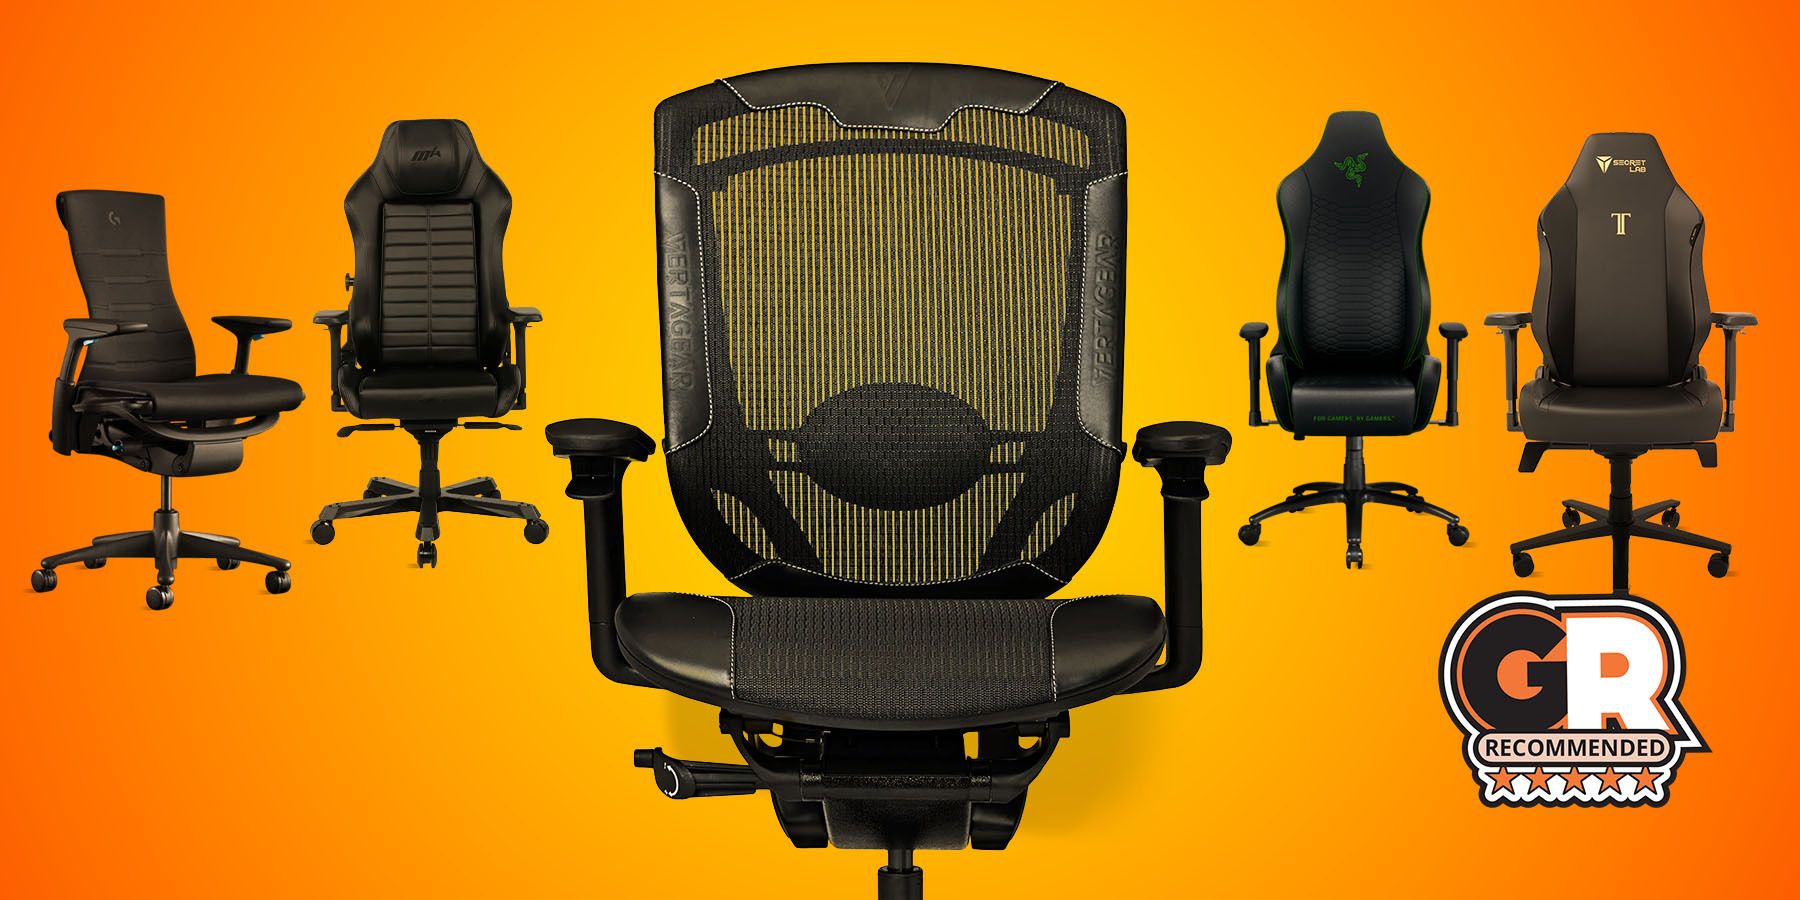 About A Chair 50 Task Chair 2.0